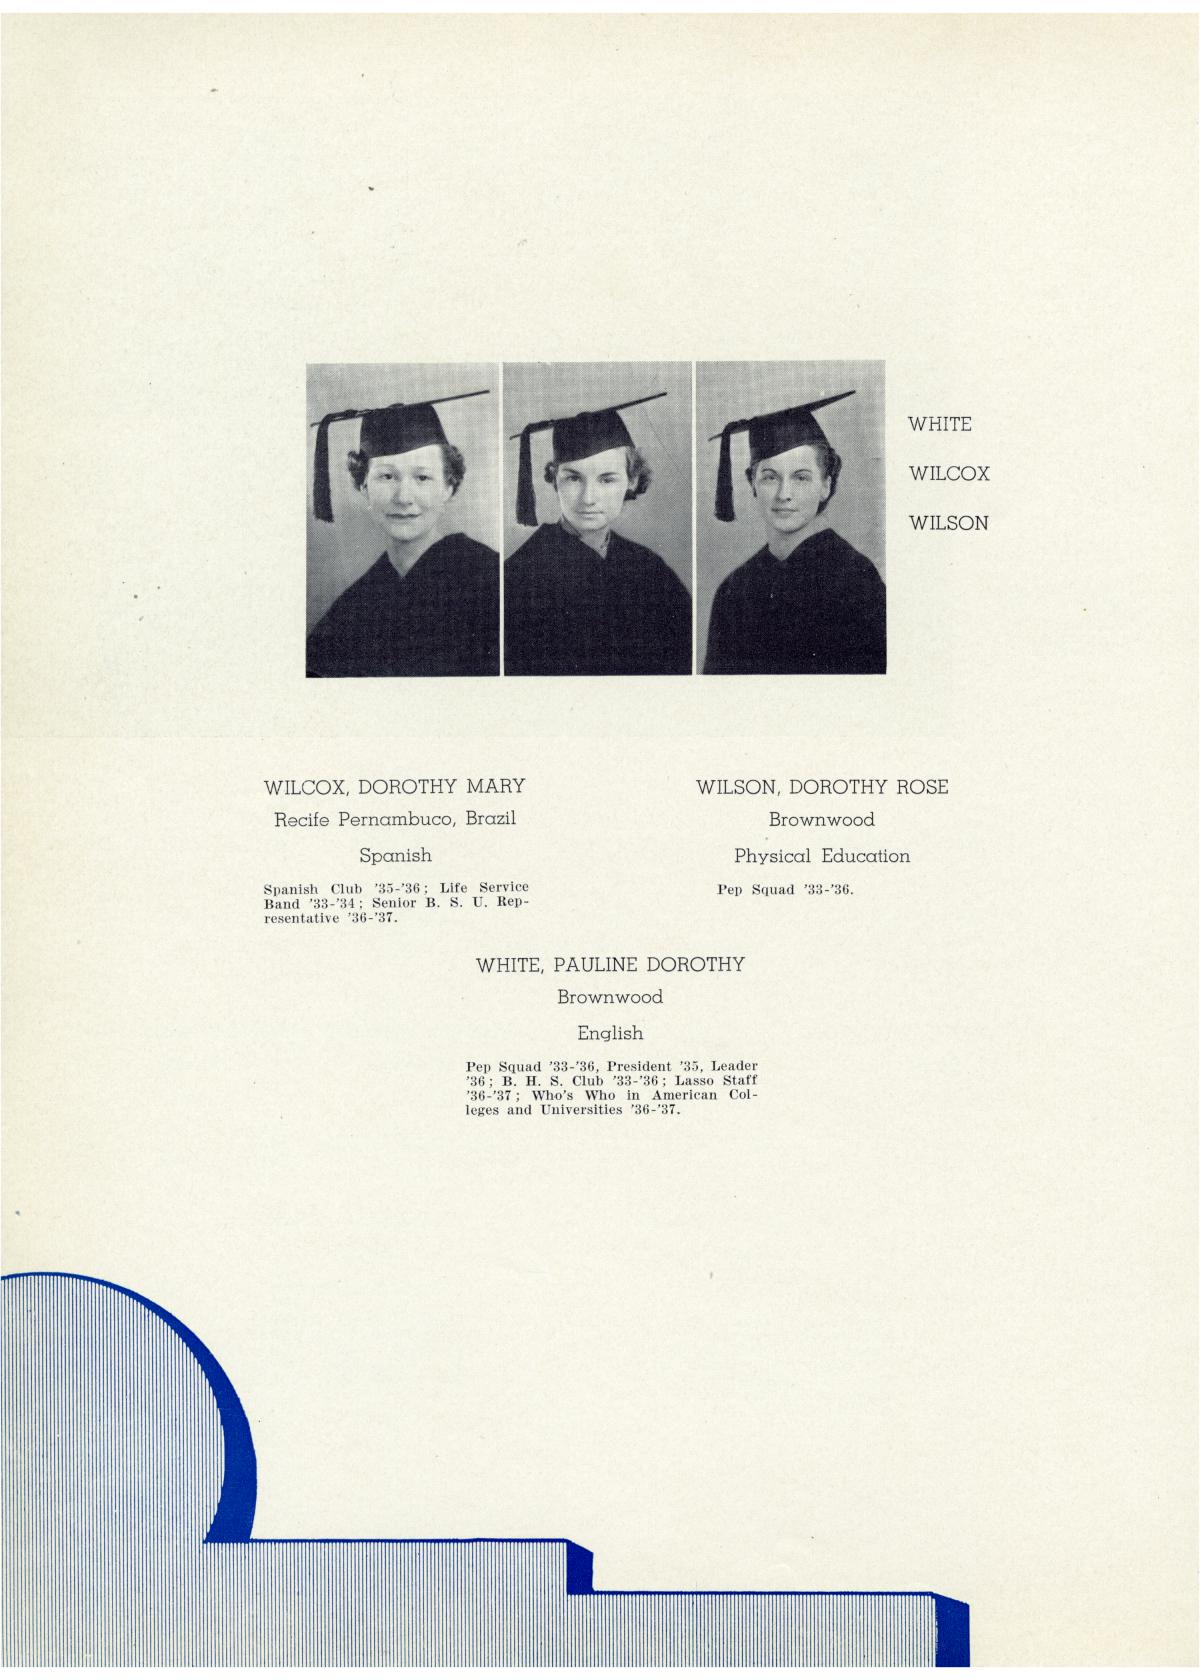 The Lasso, Yearbook of Howard Payne College, 1937
                                                
                                                    55
                                                